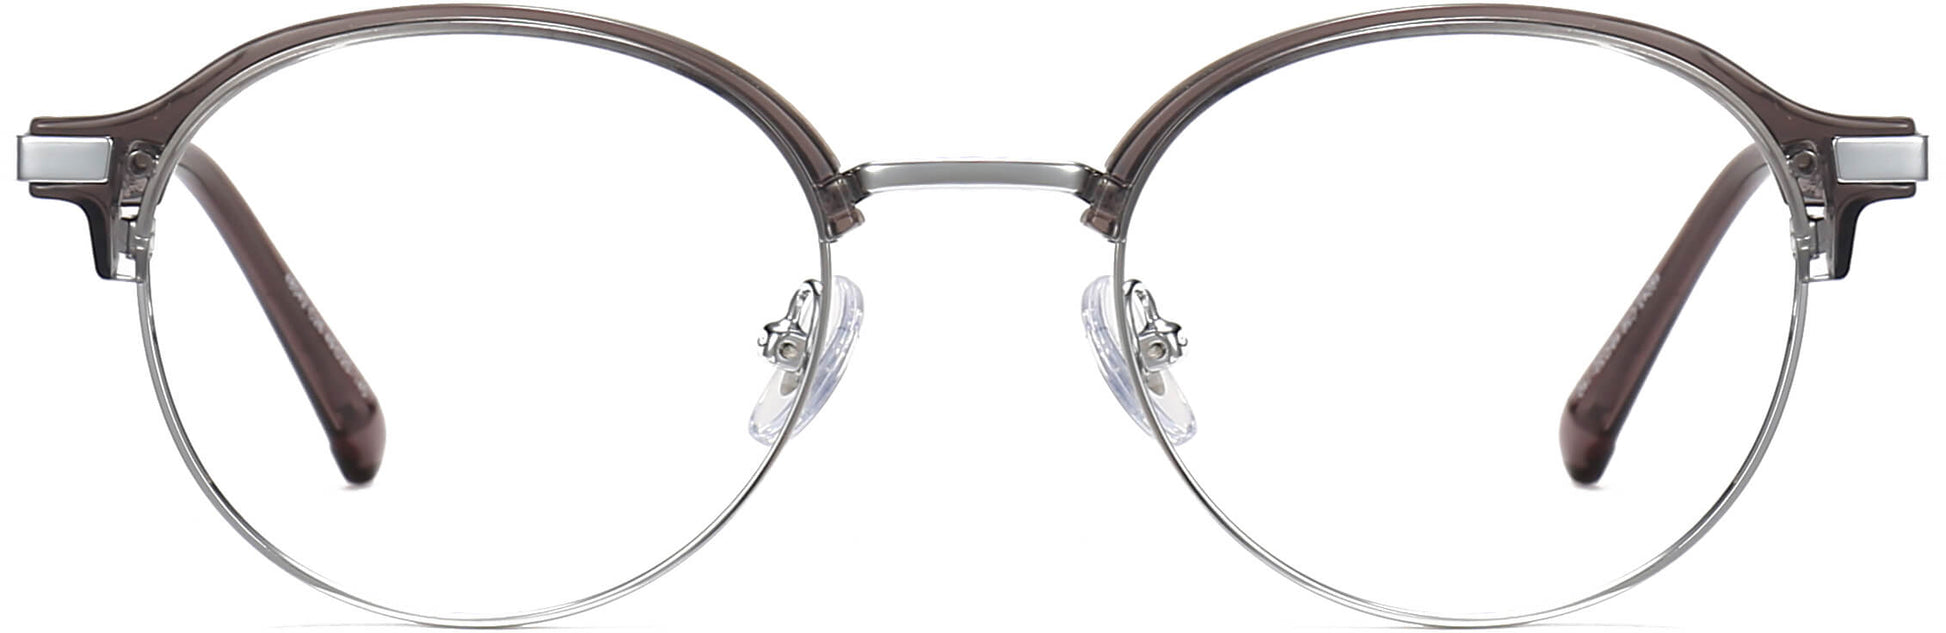 Quinton Browline Gray Eyeglasses from ANRRI, front view